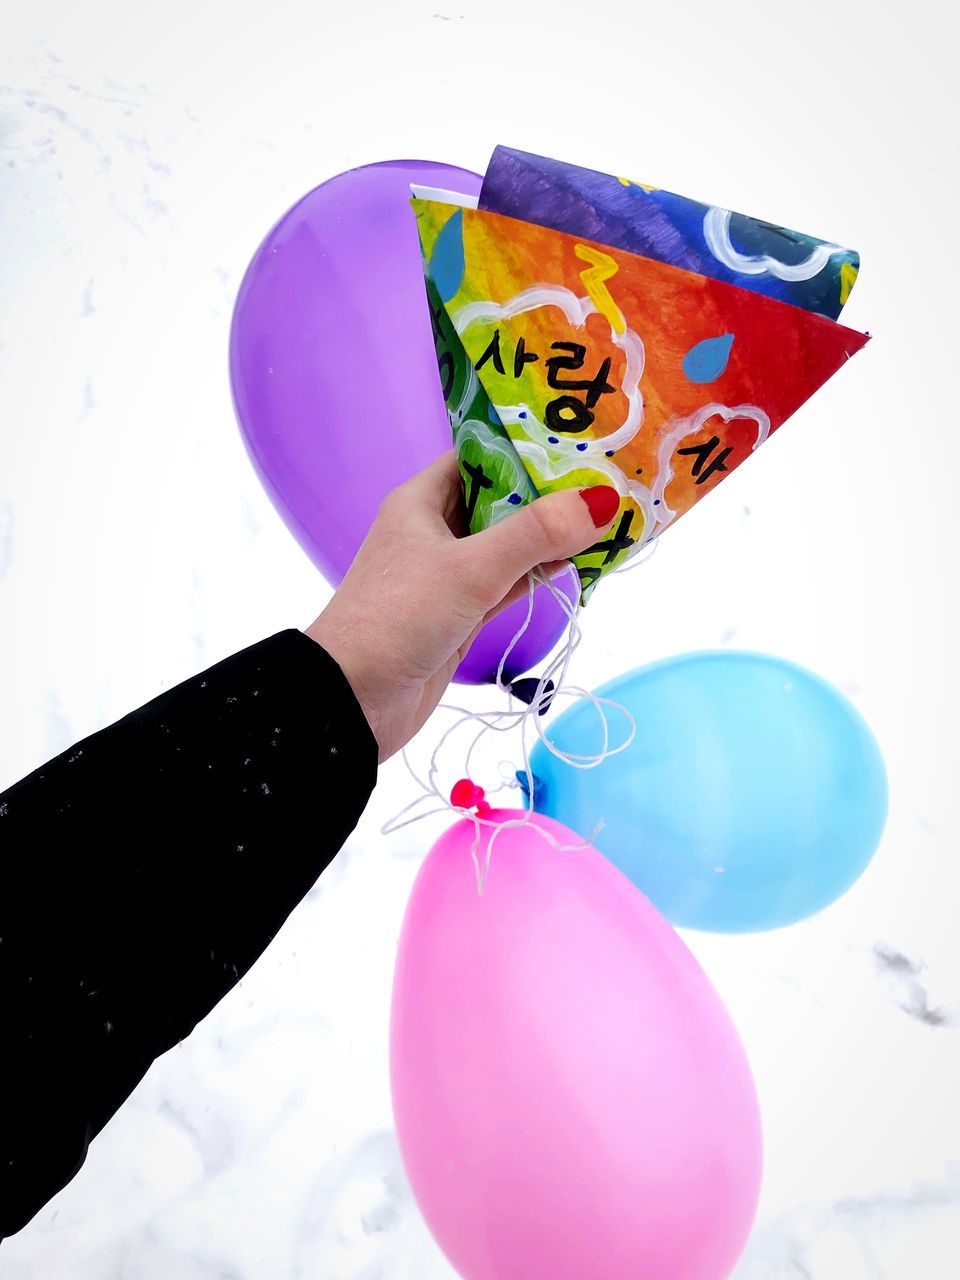 CROPPED IMAGE OF HAND HOLDING BALLOONS